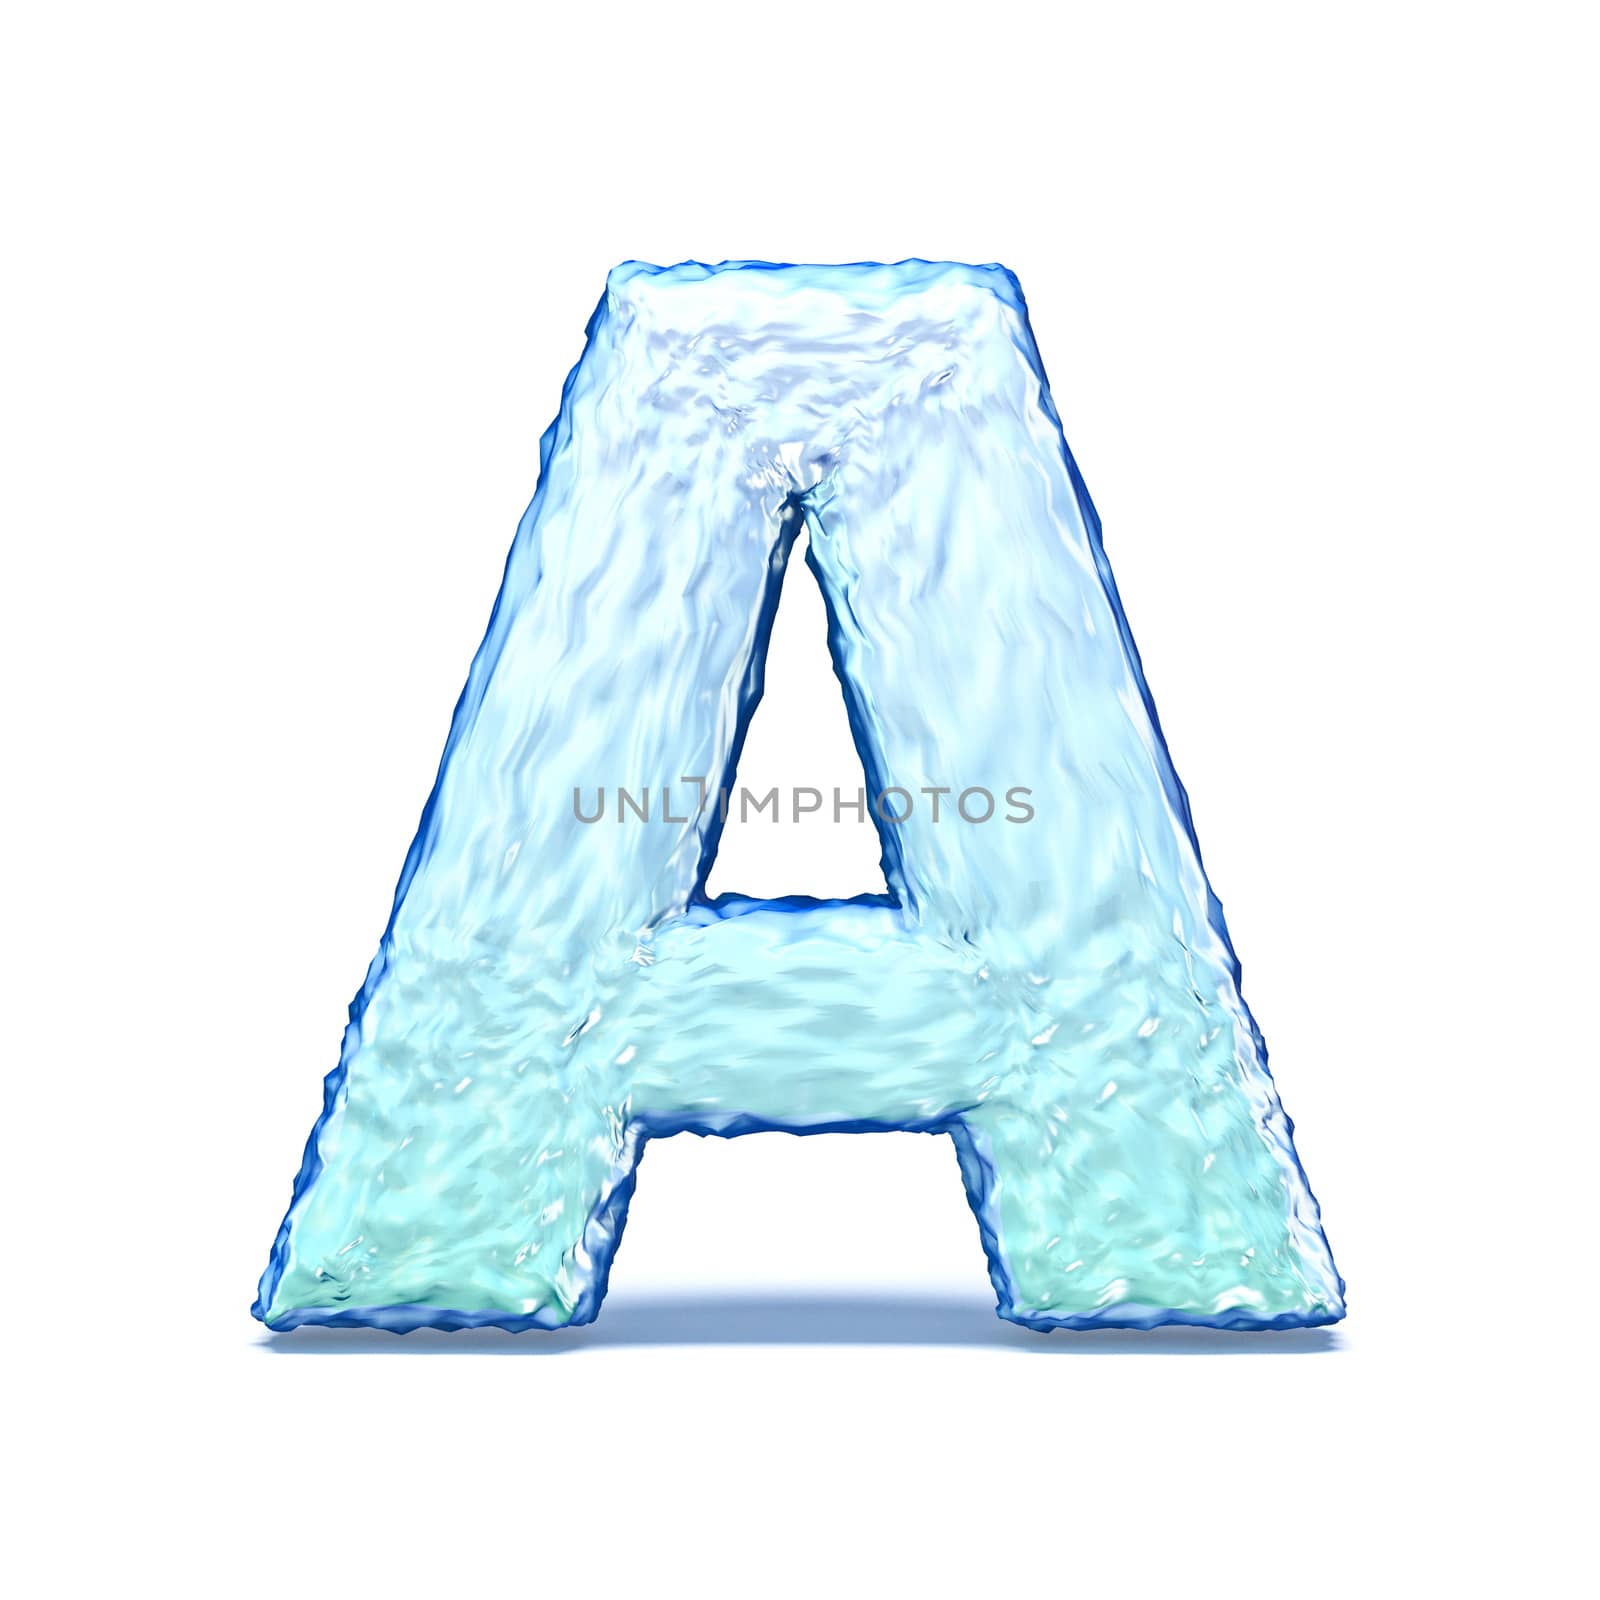 Ice crystal font letter A 3D render illustration isolated on white background